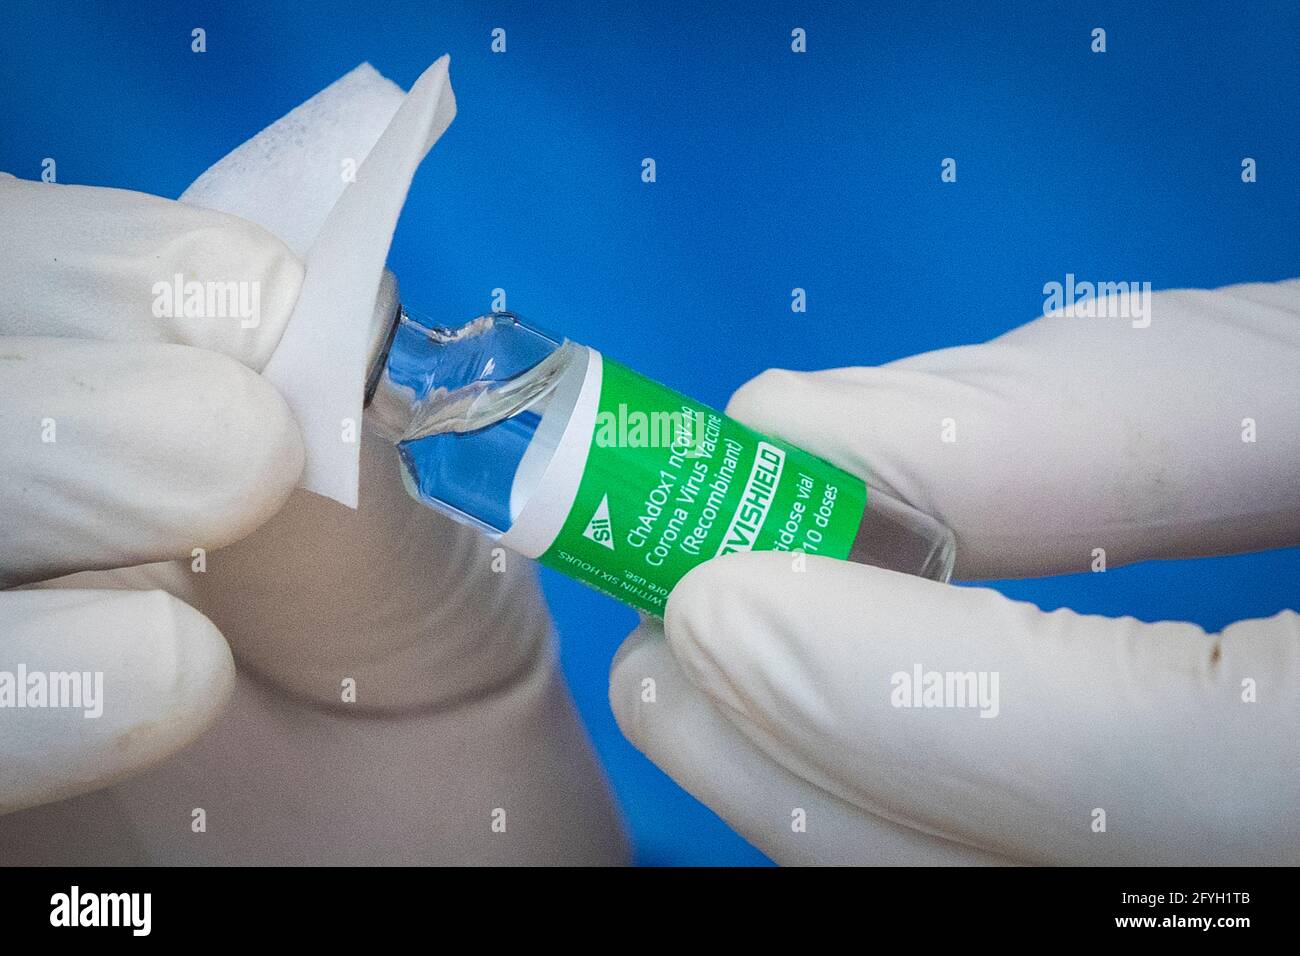 A vial of the AstraZeneca COVID-19 vaccine is cleaned before use at a pharmacy in Kingston, Ontario on Thursday, March 18, 2021, as the COVID-19 pande Stock Photo